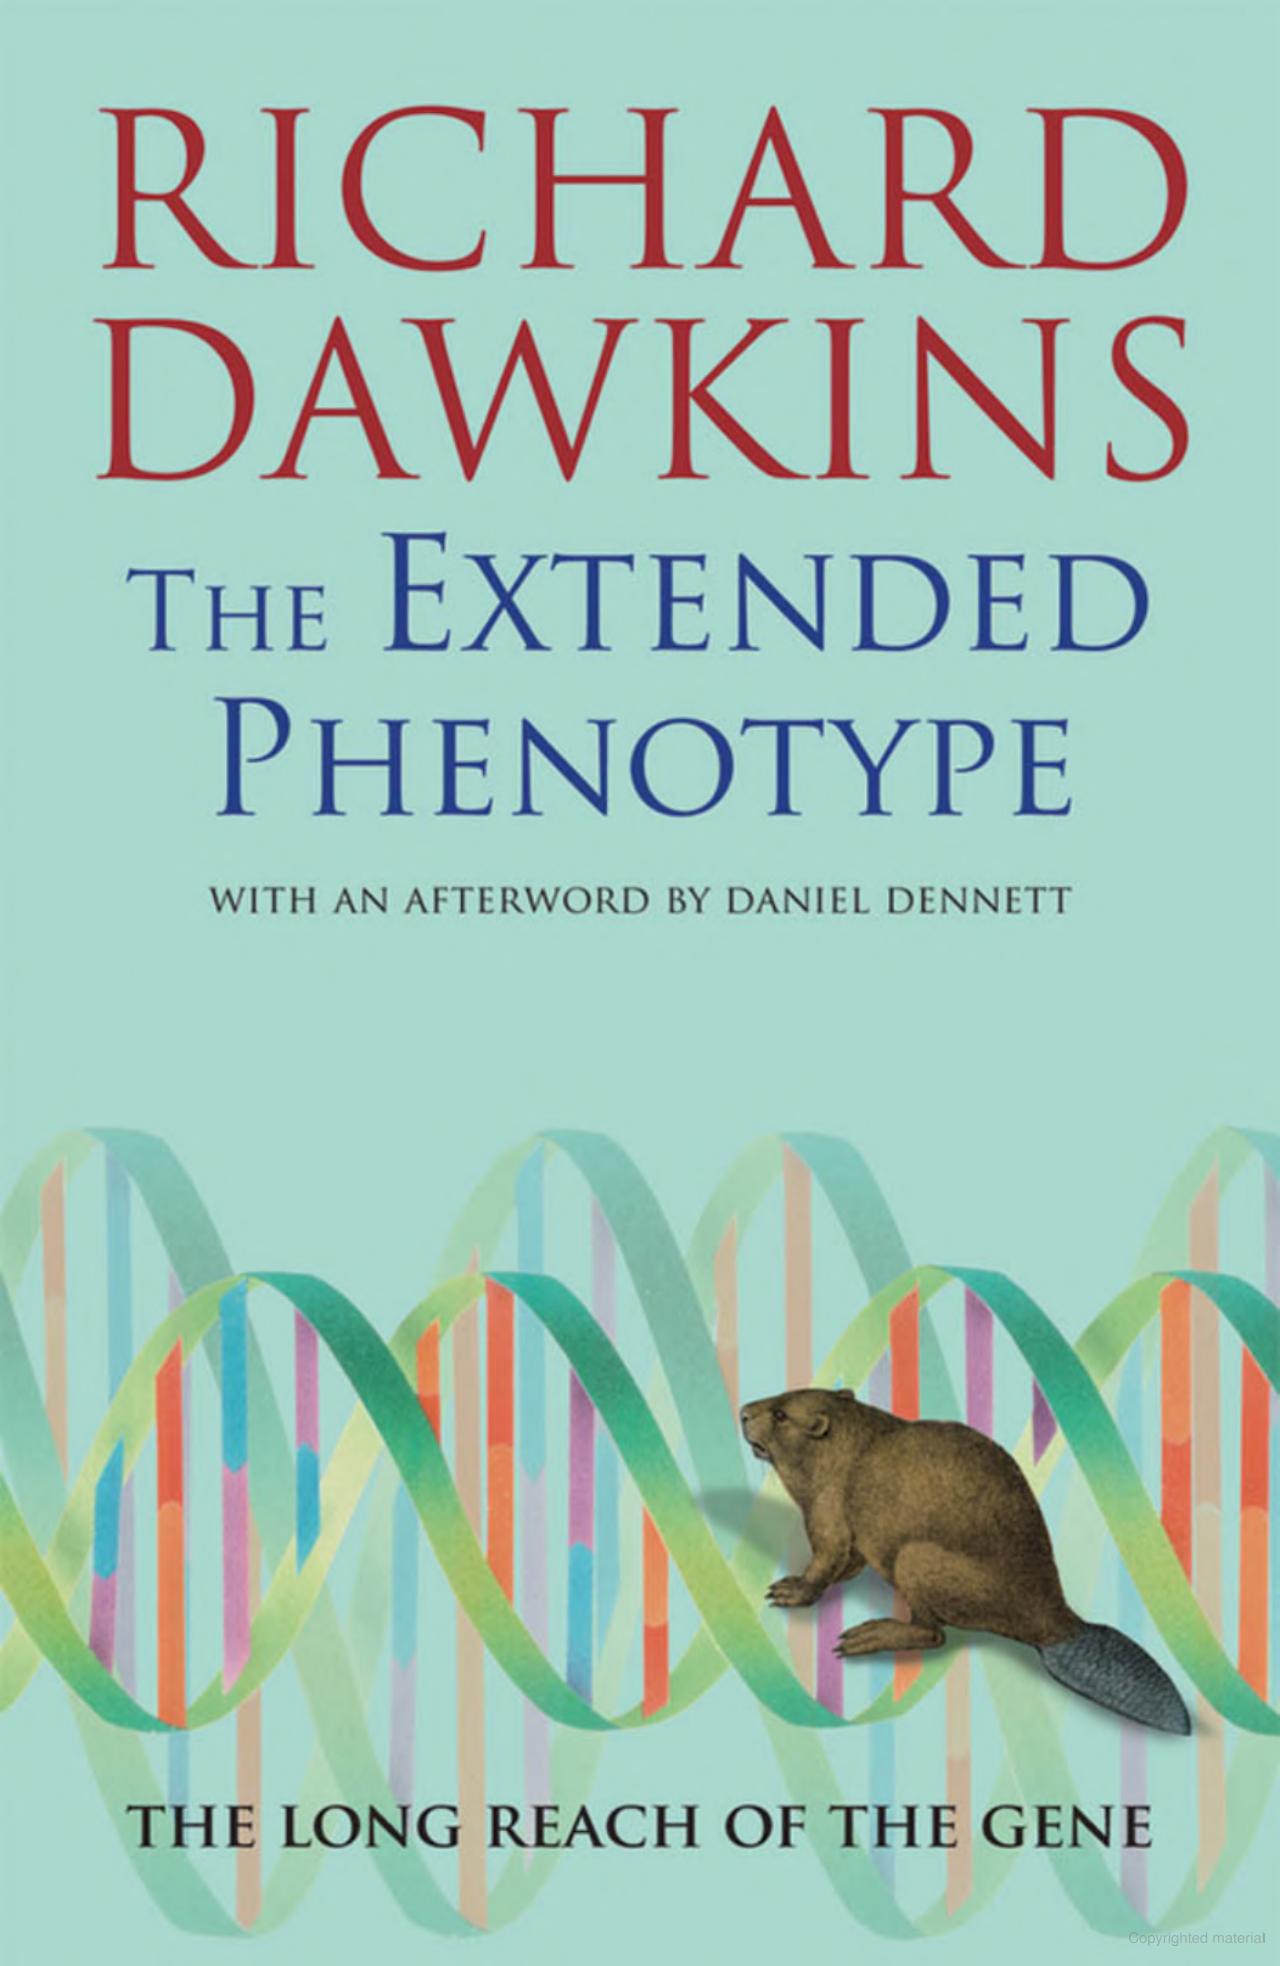 The Extended Phenotype (1999, Oxford University Press)